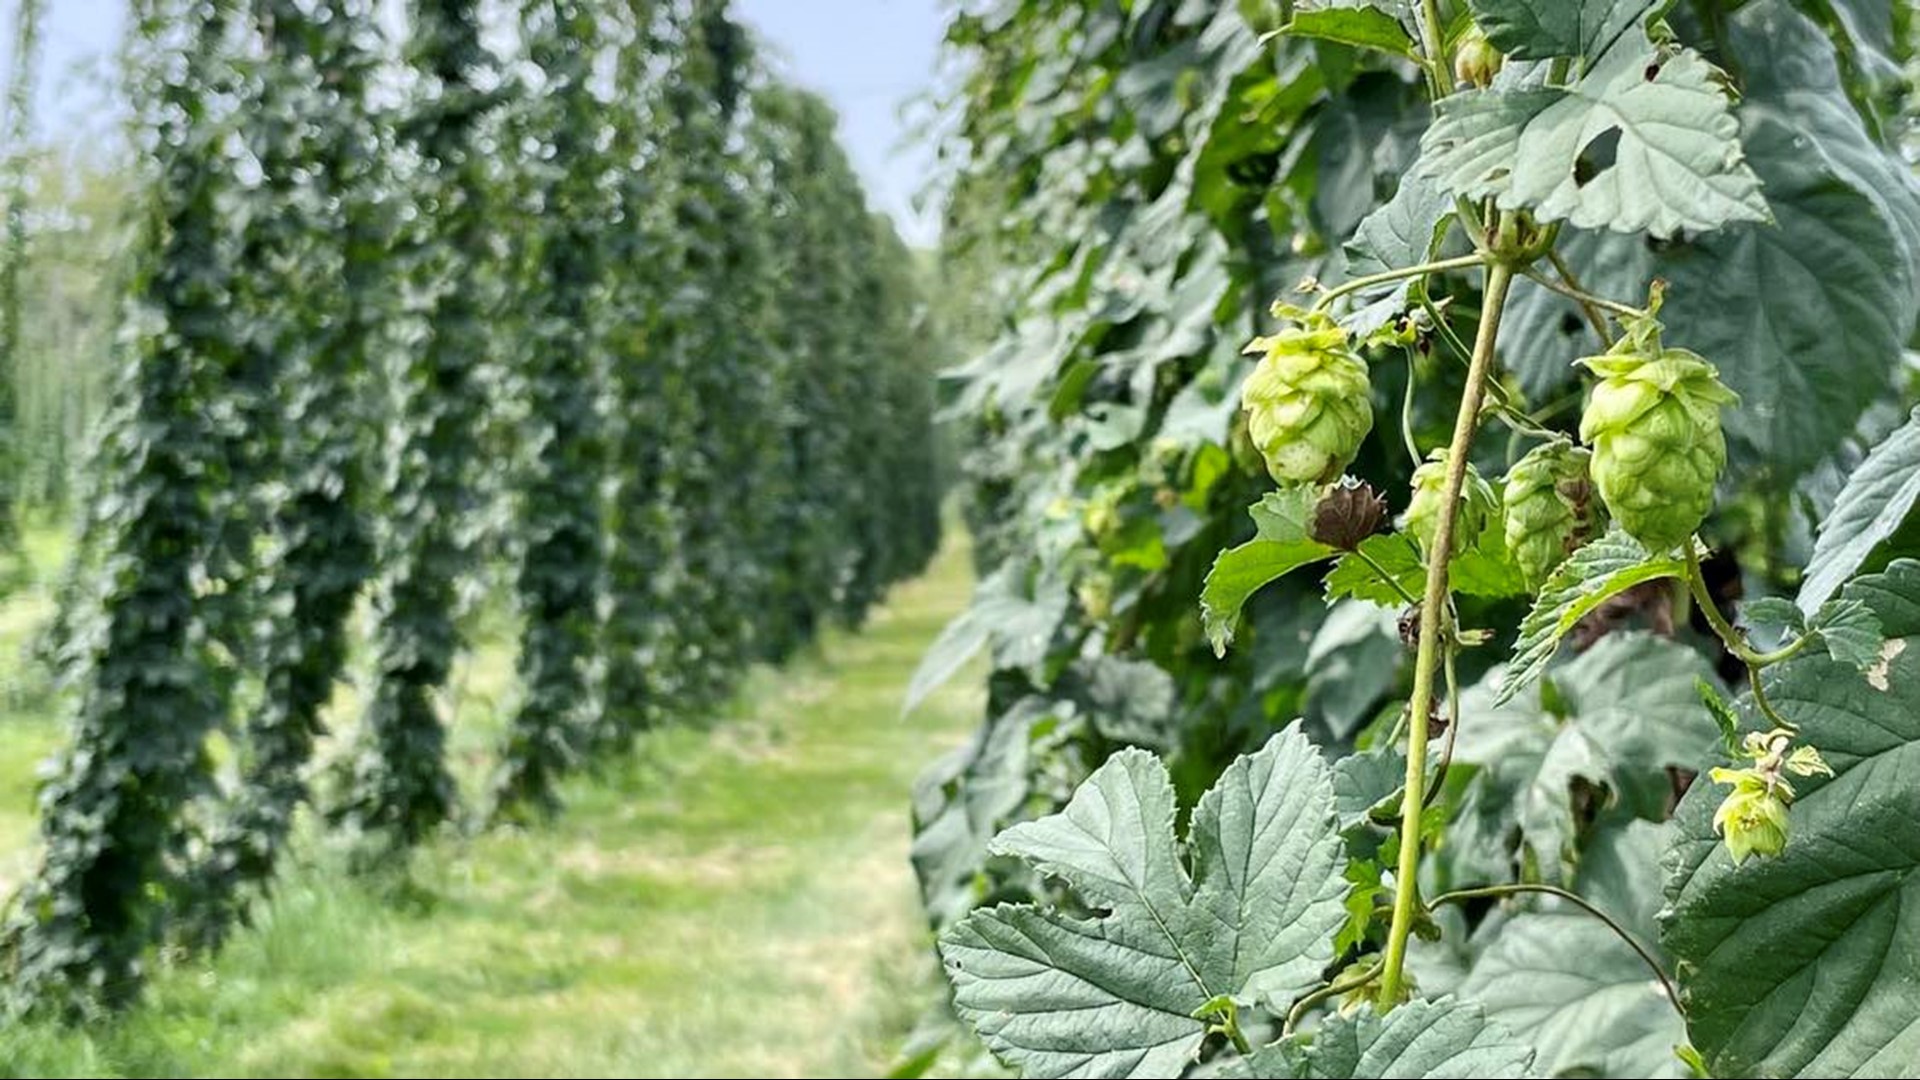 When a hops farmer in Cumberland Co. learned he had cancer, craft beer brewers from around Pennsylvania came to help him harvest his crop.